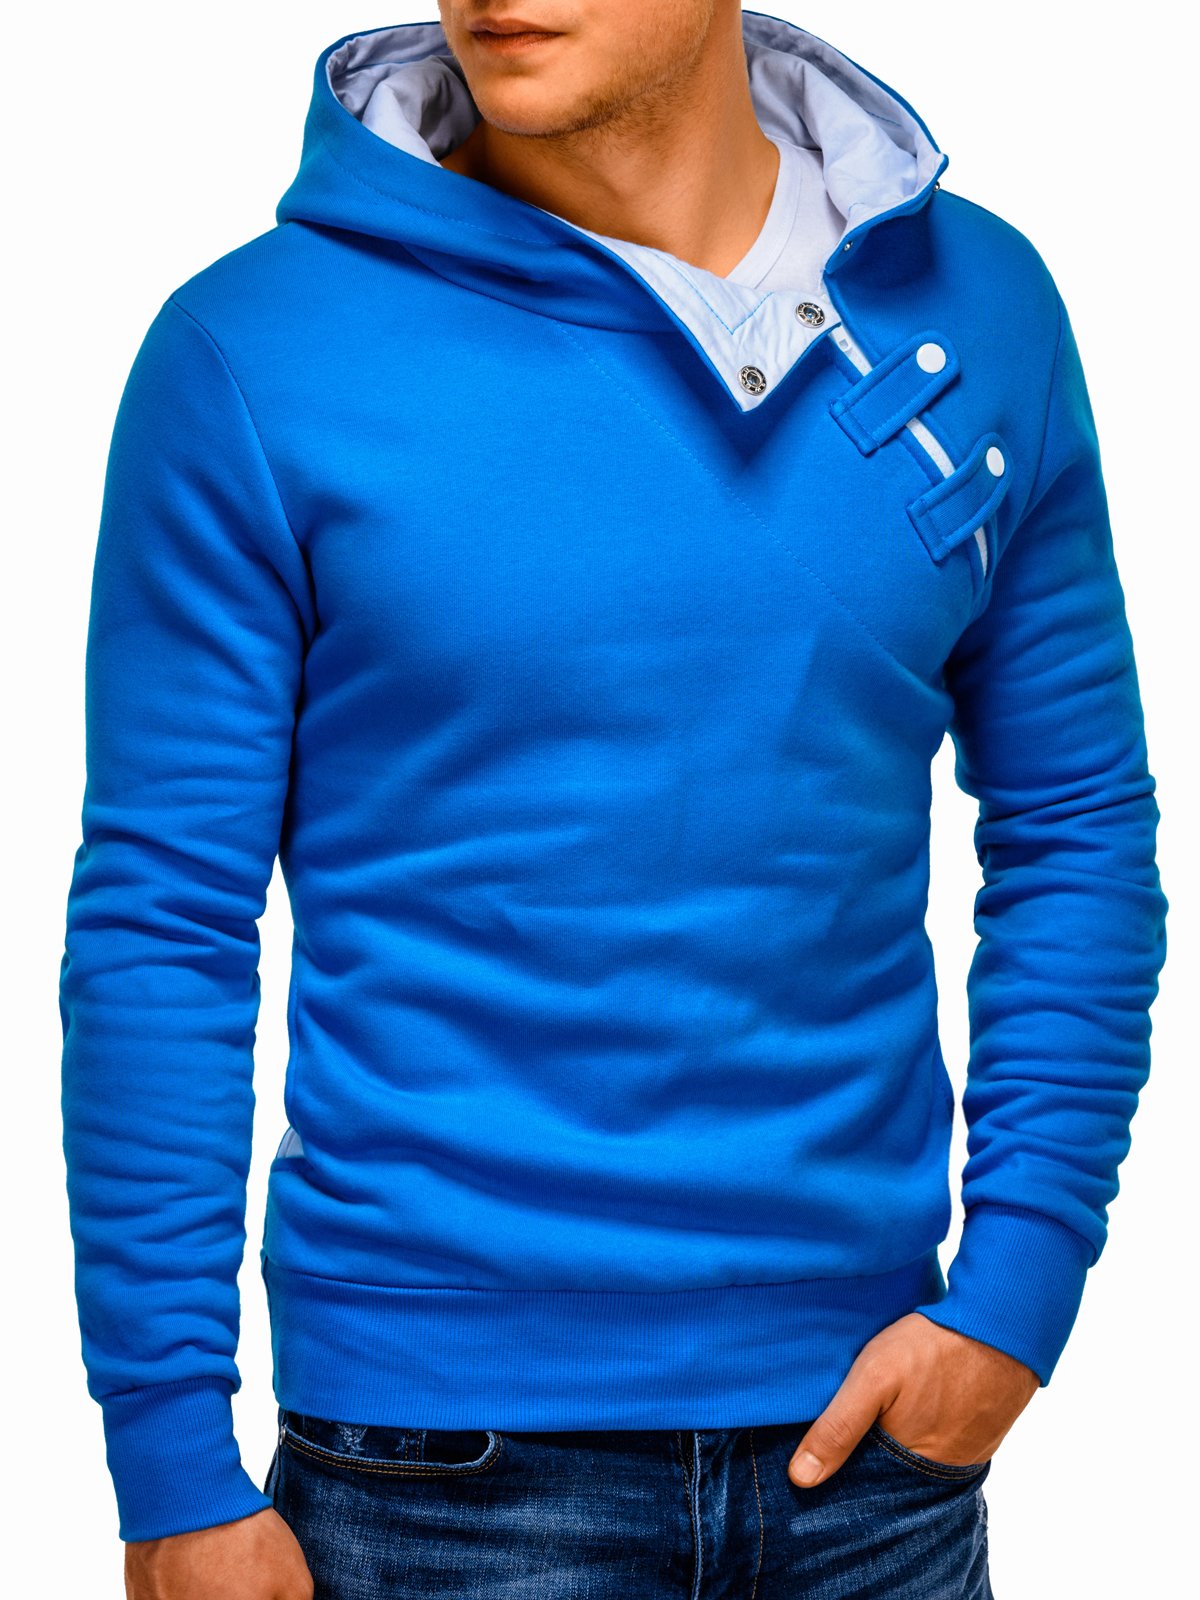 Men's hoodie PACO - turquoise/white | MODONE wholesale - Clothing For Men